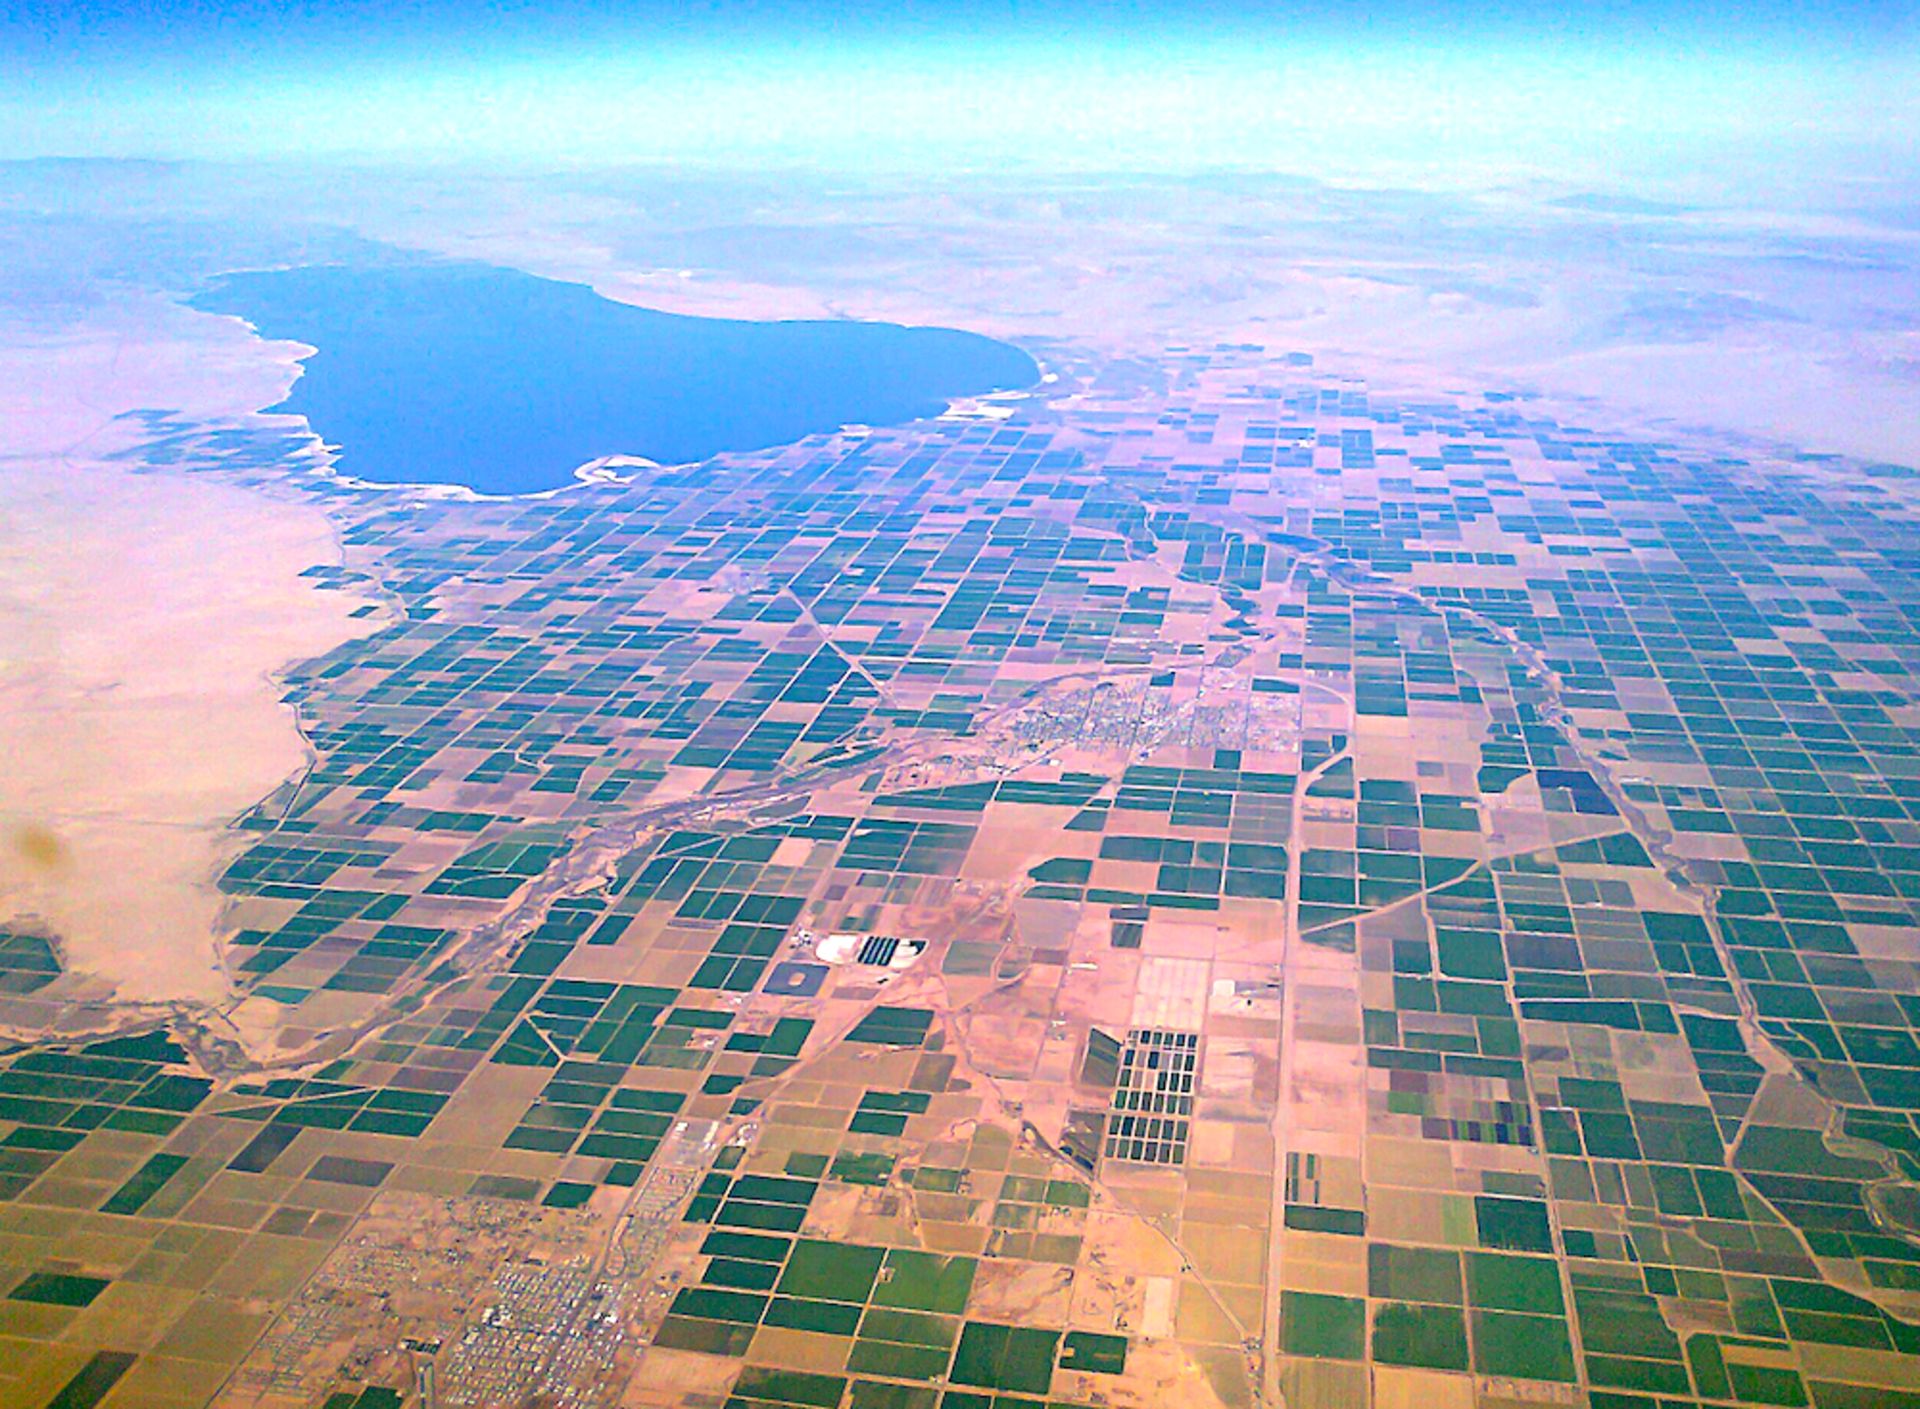 Almost 12 Acres in Southern California: Discover Imperial County's Potential by the Salton Sea! - Image 11 of 16